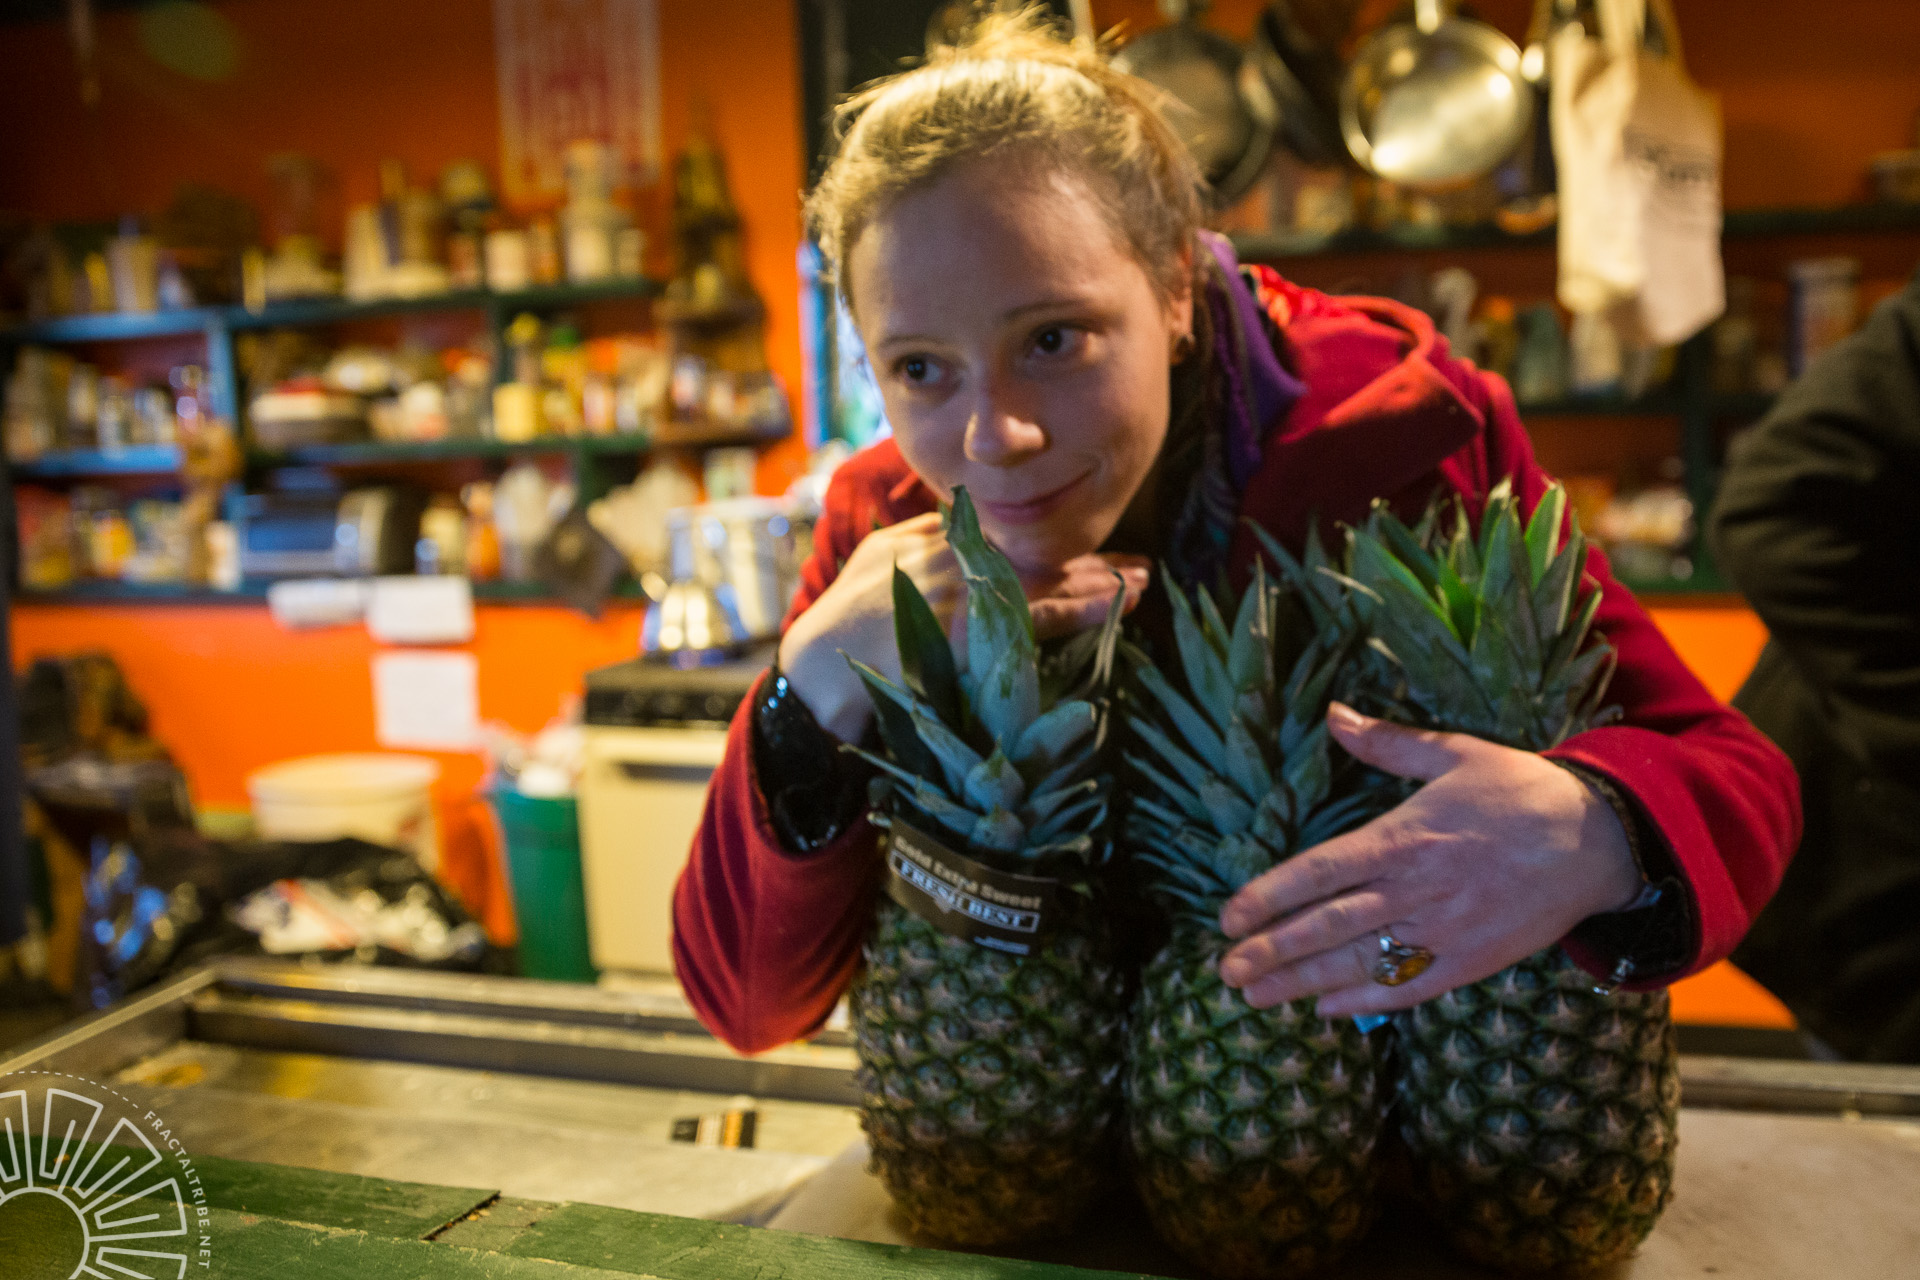 Pineapple Mistress @ Fractaltribe presents Year of the Fractilia